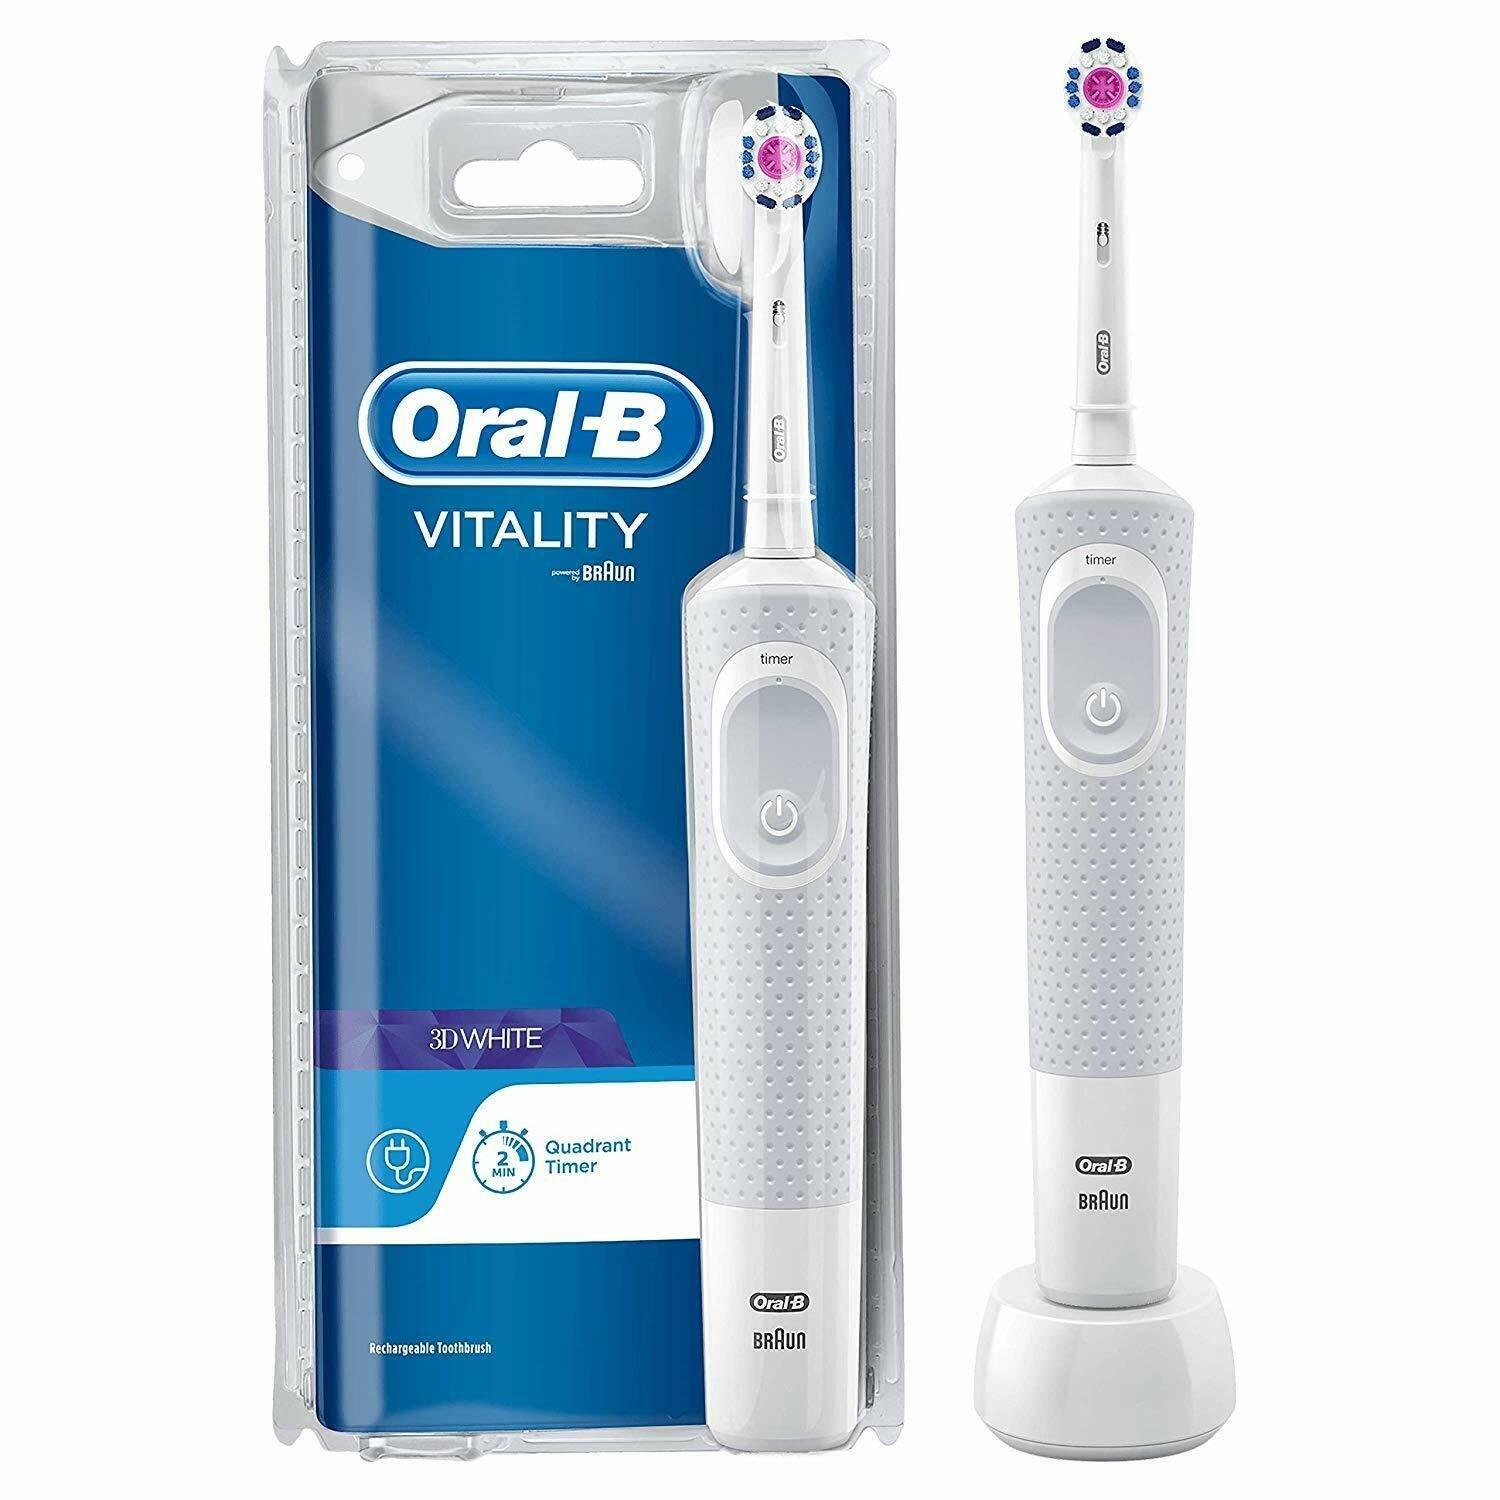 OralB Vitality Pro 3D White Electric Rechargeable Toothbrush With Timer White Feelunique